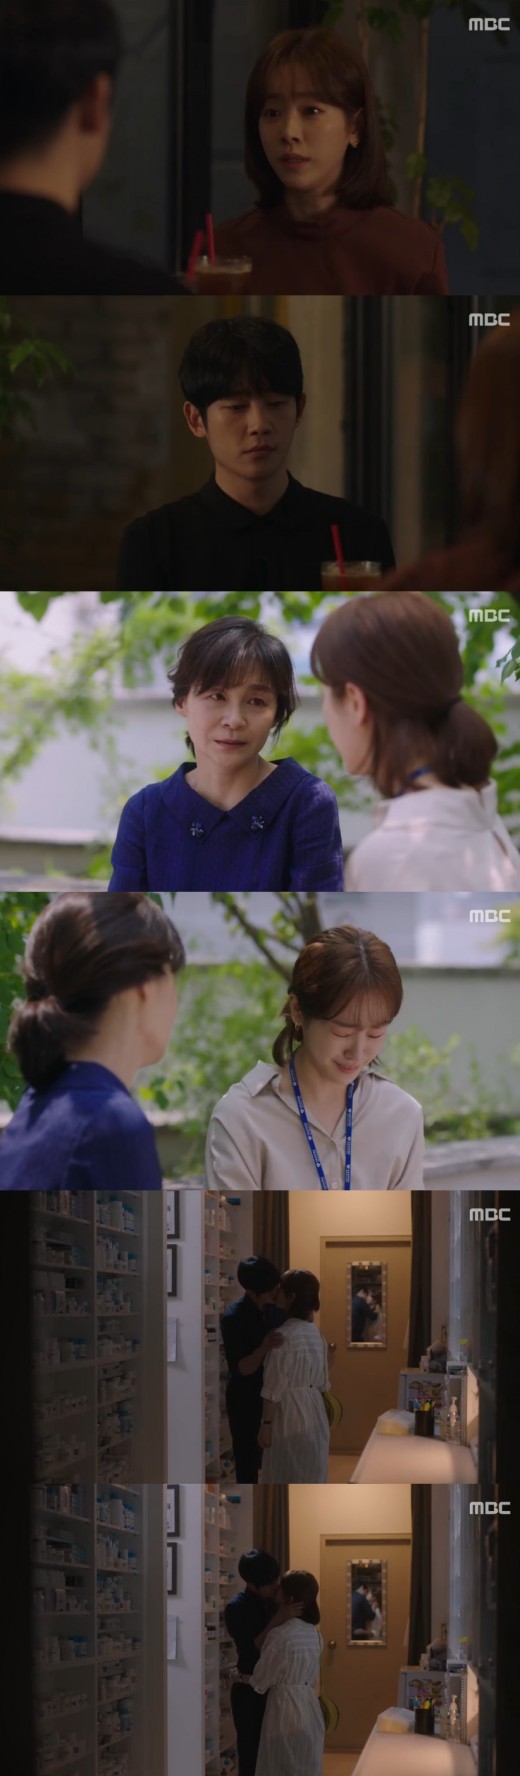 After the rain, the land became harder after Han Ji-min and Jung Hae-in over the first Danger. The Spring Night took a step closer to Happy Endings ahead of its end.On MBCs Spring Night broadcast on the 10th, the reconciliation between Choi Jung-in (Han Ji-min) and JiHo (Jeong Hae-in) was drawn.JiHo had previously expressed anxiety about Choi Jung-in in front of him, saying, Do not abandon us. Choi Jung-in felt confused when he learned that it was a false statement.If JiHo realizes his mistake and is restless, Hye-jung (Seo Jeong-yeon) advised, What about Choi Jung-in, you have a heavy past, but do not want to understand.In the end, JiHo put Choi Jung-in in front of him and said, I was really drunk and drunk, did I think of Choi Jung-in?Im so sorry, but I never thought of it. Im sorry to leave you. Im embarrassed to move you to your mouth.Choi Jung-in said, I never imagined it. I asked if I would throw it away. Im right about catching a horse.But the honest feeling I received was, Is not it the same as Choi Jung-in? I didnt think that the time had passed would heal without a trace, but that doesnt cover it, said Choi Jung-in.JiHo repeatedly asked Choi Jung-in, Do not abandon us, to think about time.On this day, Hyung-sun (Gil Hae-yeon) visited Choi Jung-ins library and allowed her to have a relationship with JiHo, saying, It seems like your life is happy, but what else is important.But the prosecution said, There are still many mountains to overcome, and it will be harder than I was prepared to do. There may be moments of regret.Choi Jung-in finally wept.Kiseok used England (Kim Chang-wan) and Taehak (Song Seung-hwan) again to separate Choi Jung-in and JiHo, but JiHo did not shake.Choi Jung-ins figure sharing a kiss of reconciliation with Choi Jung-in has heightened expectations for Happy Endings.